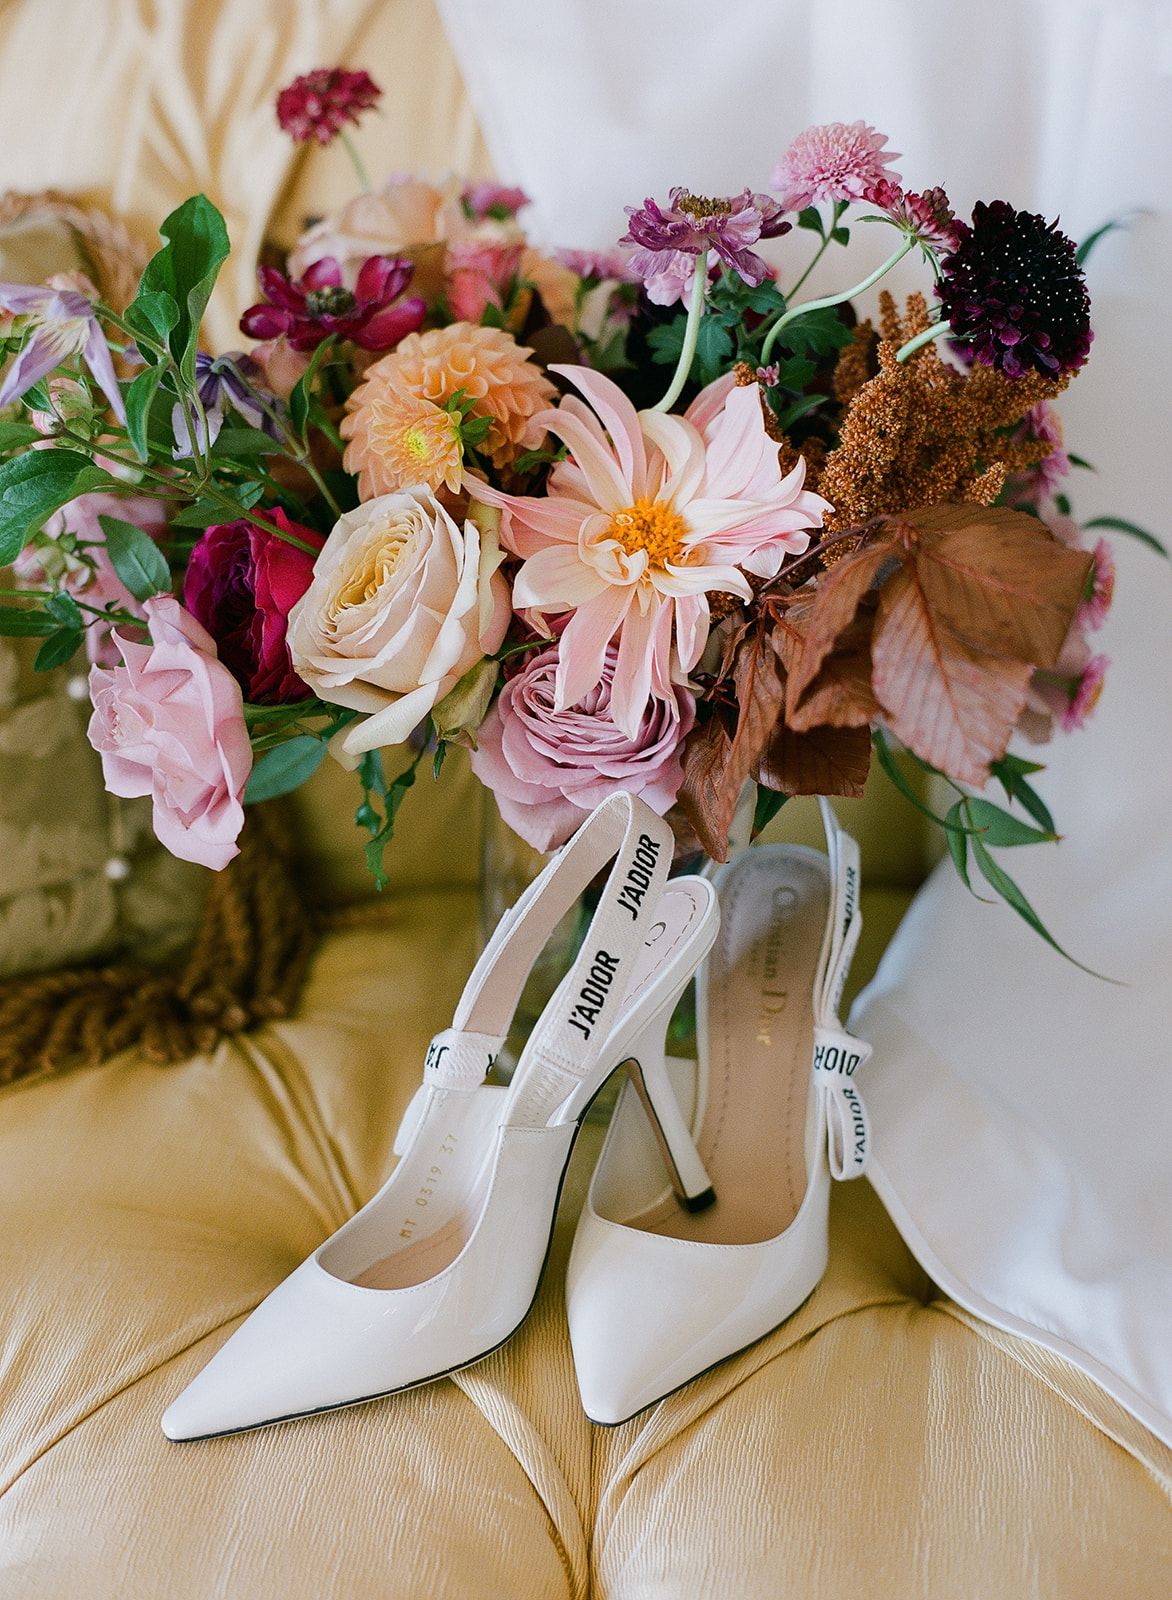 Designer shoes in a chair with bouquet